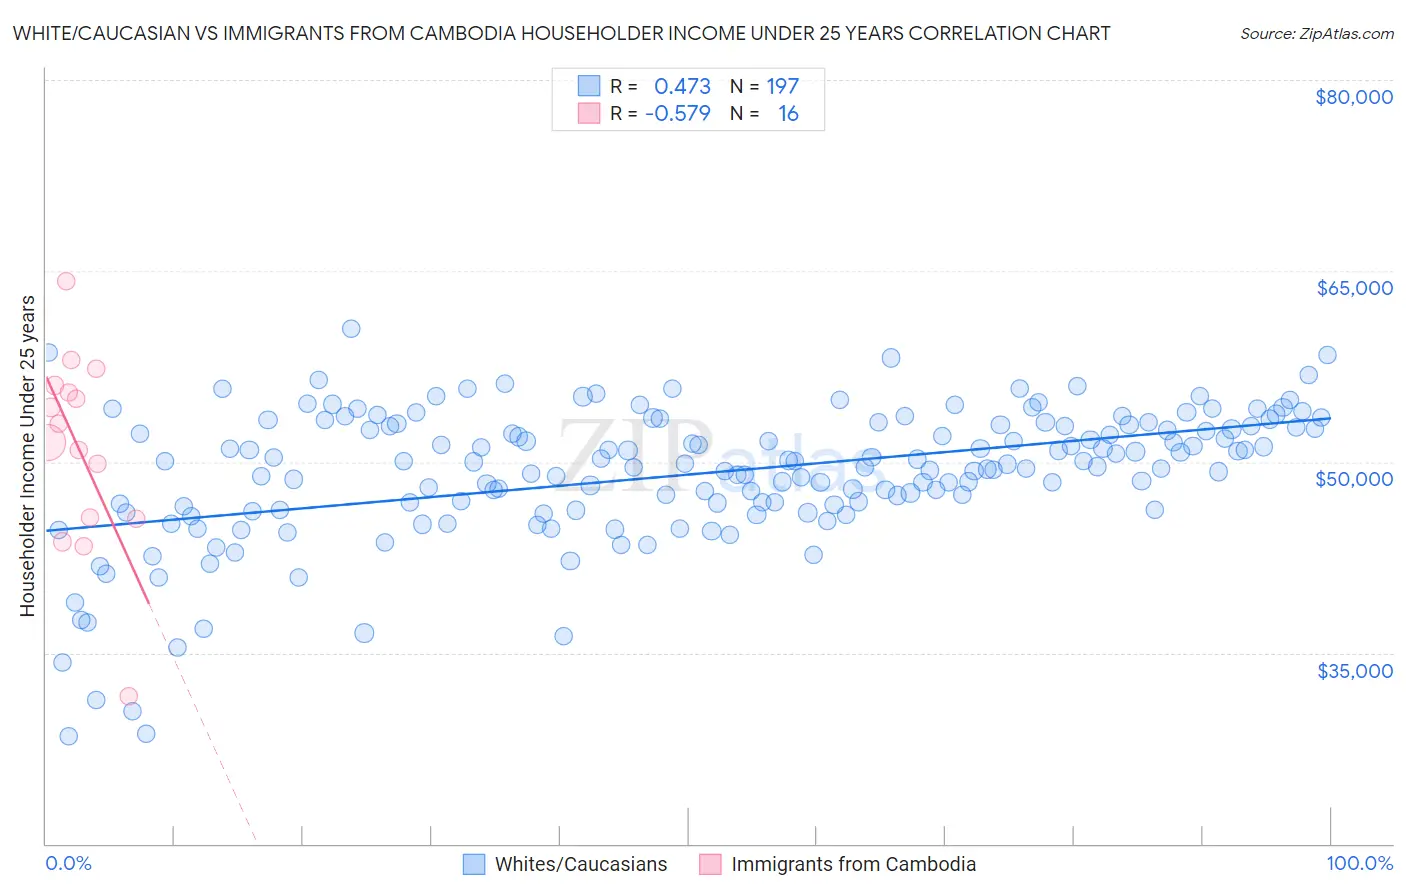 White/Caucasian vs Immigrants from Cambodia Householder Income Under 25 years